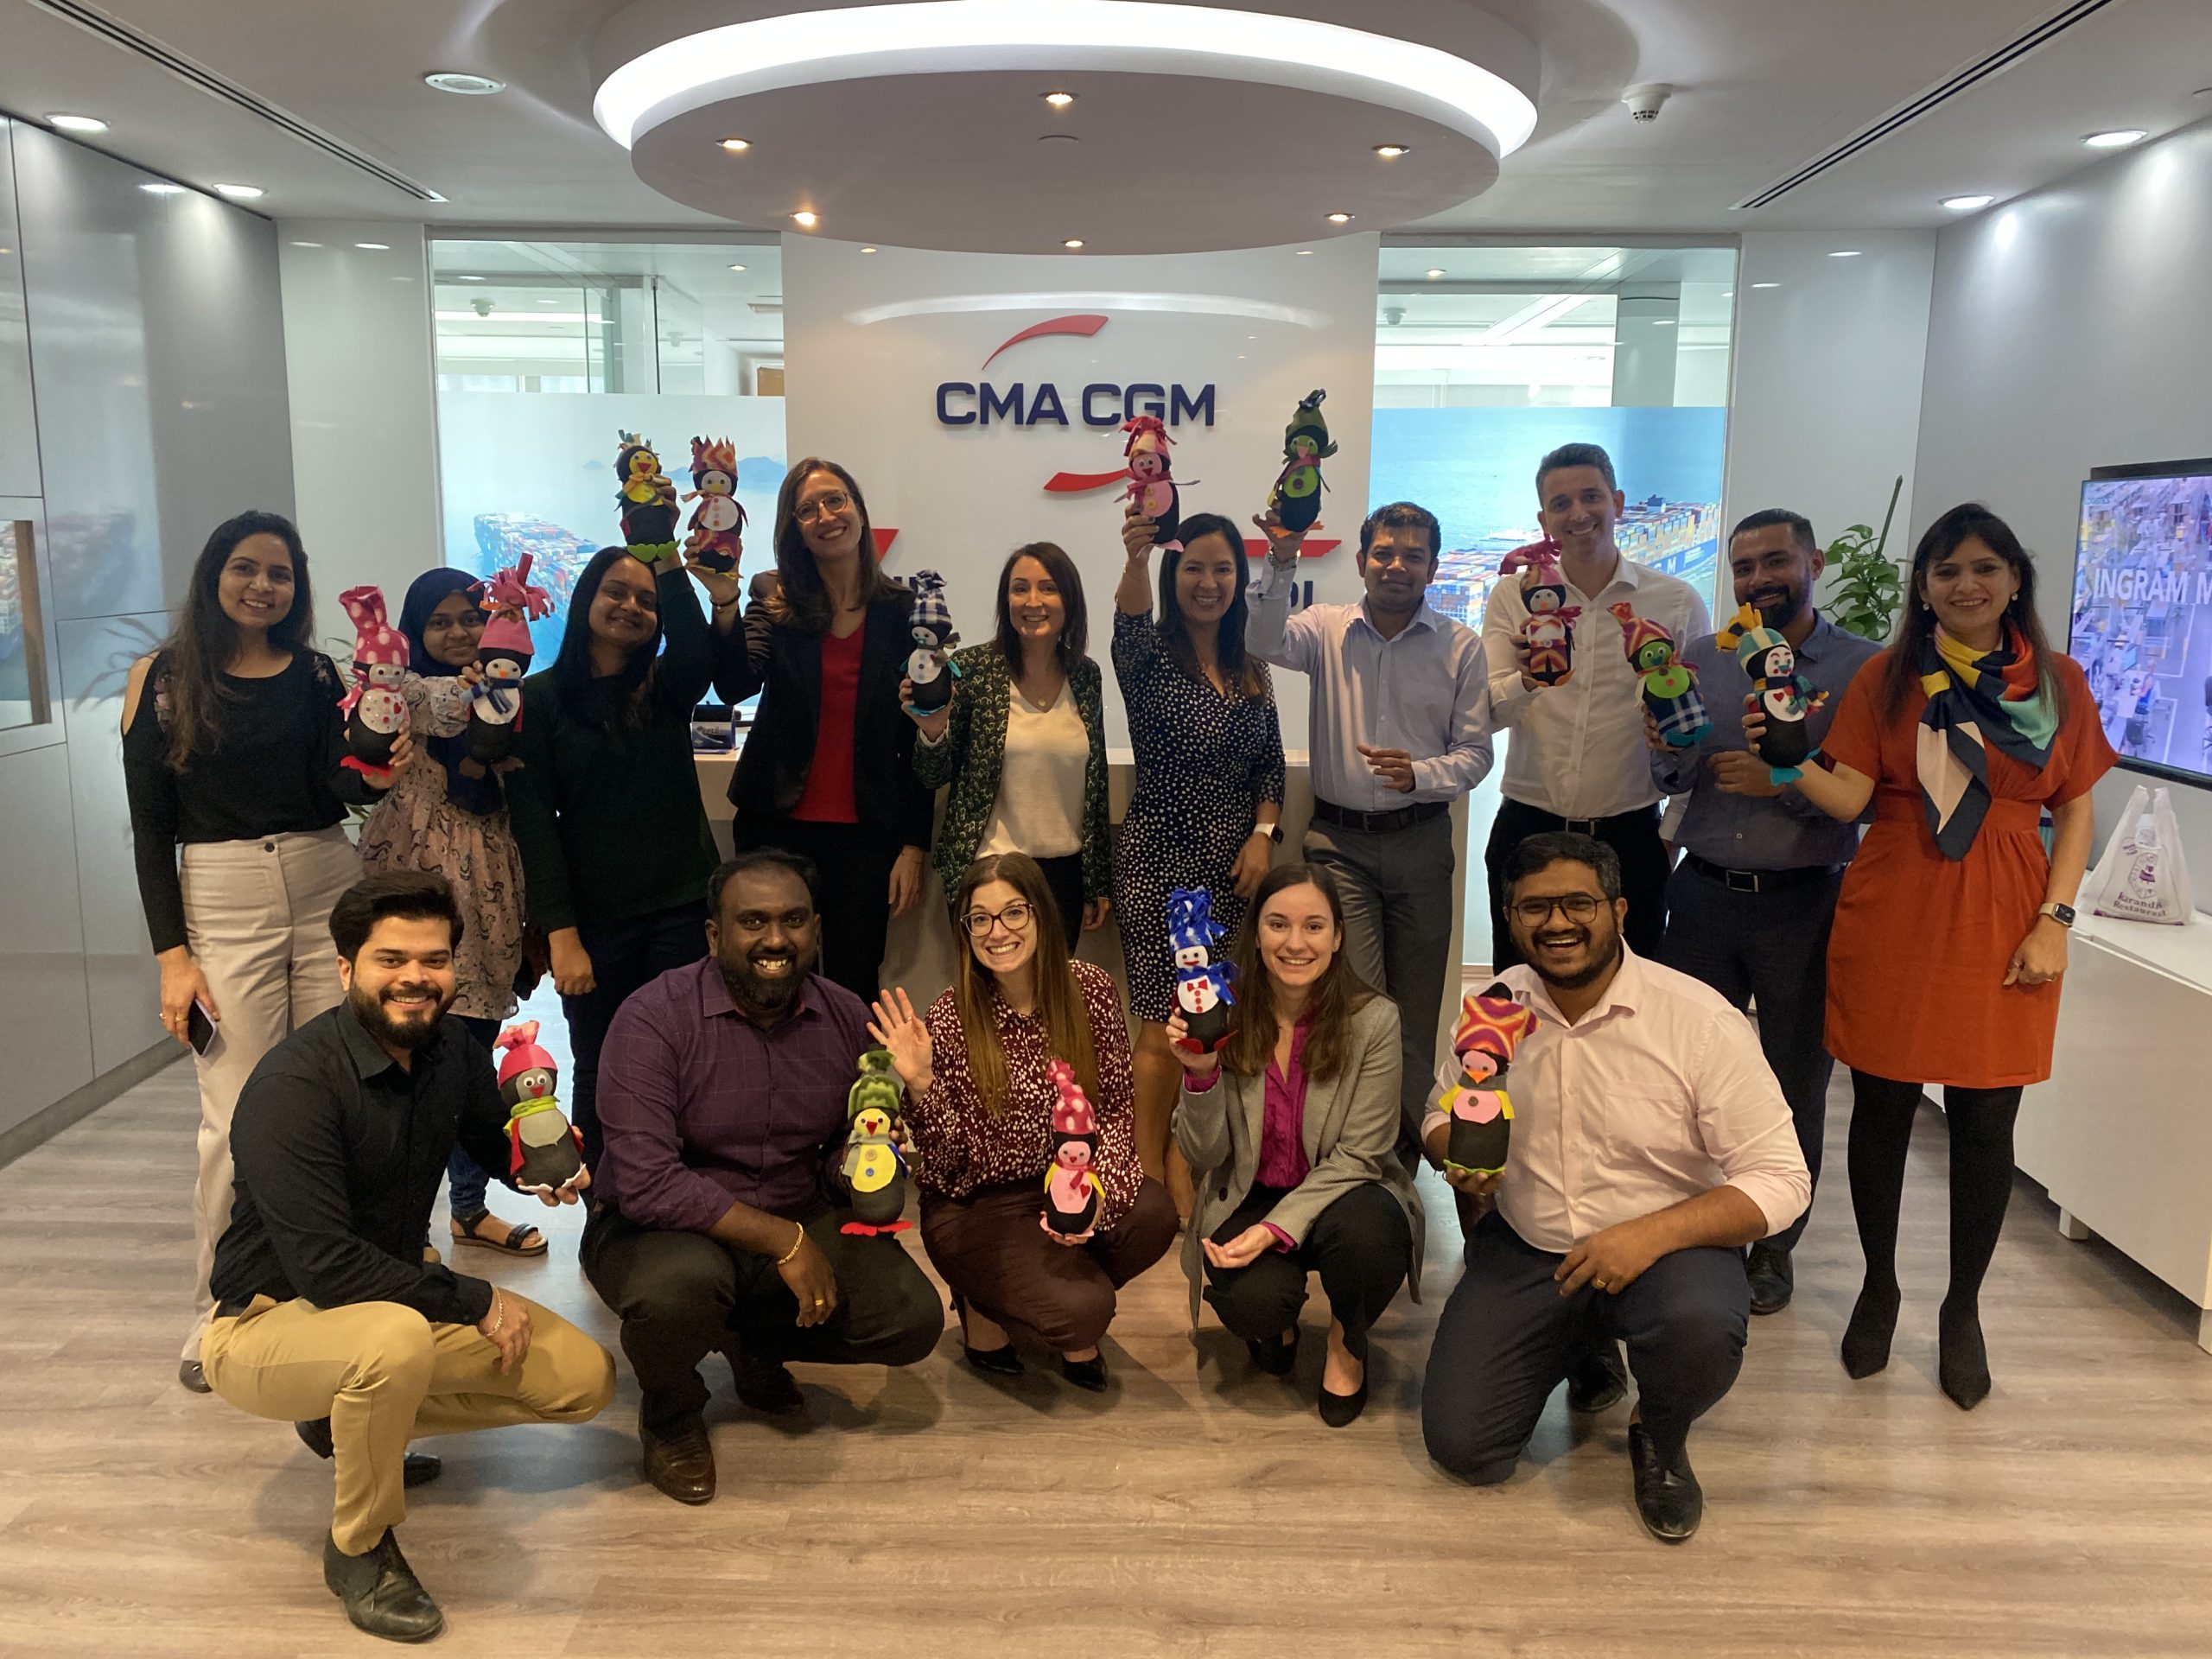 Toy Making For Children with CMA CGM